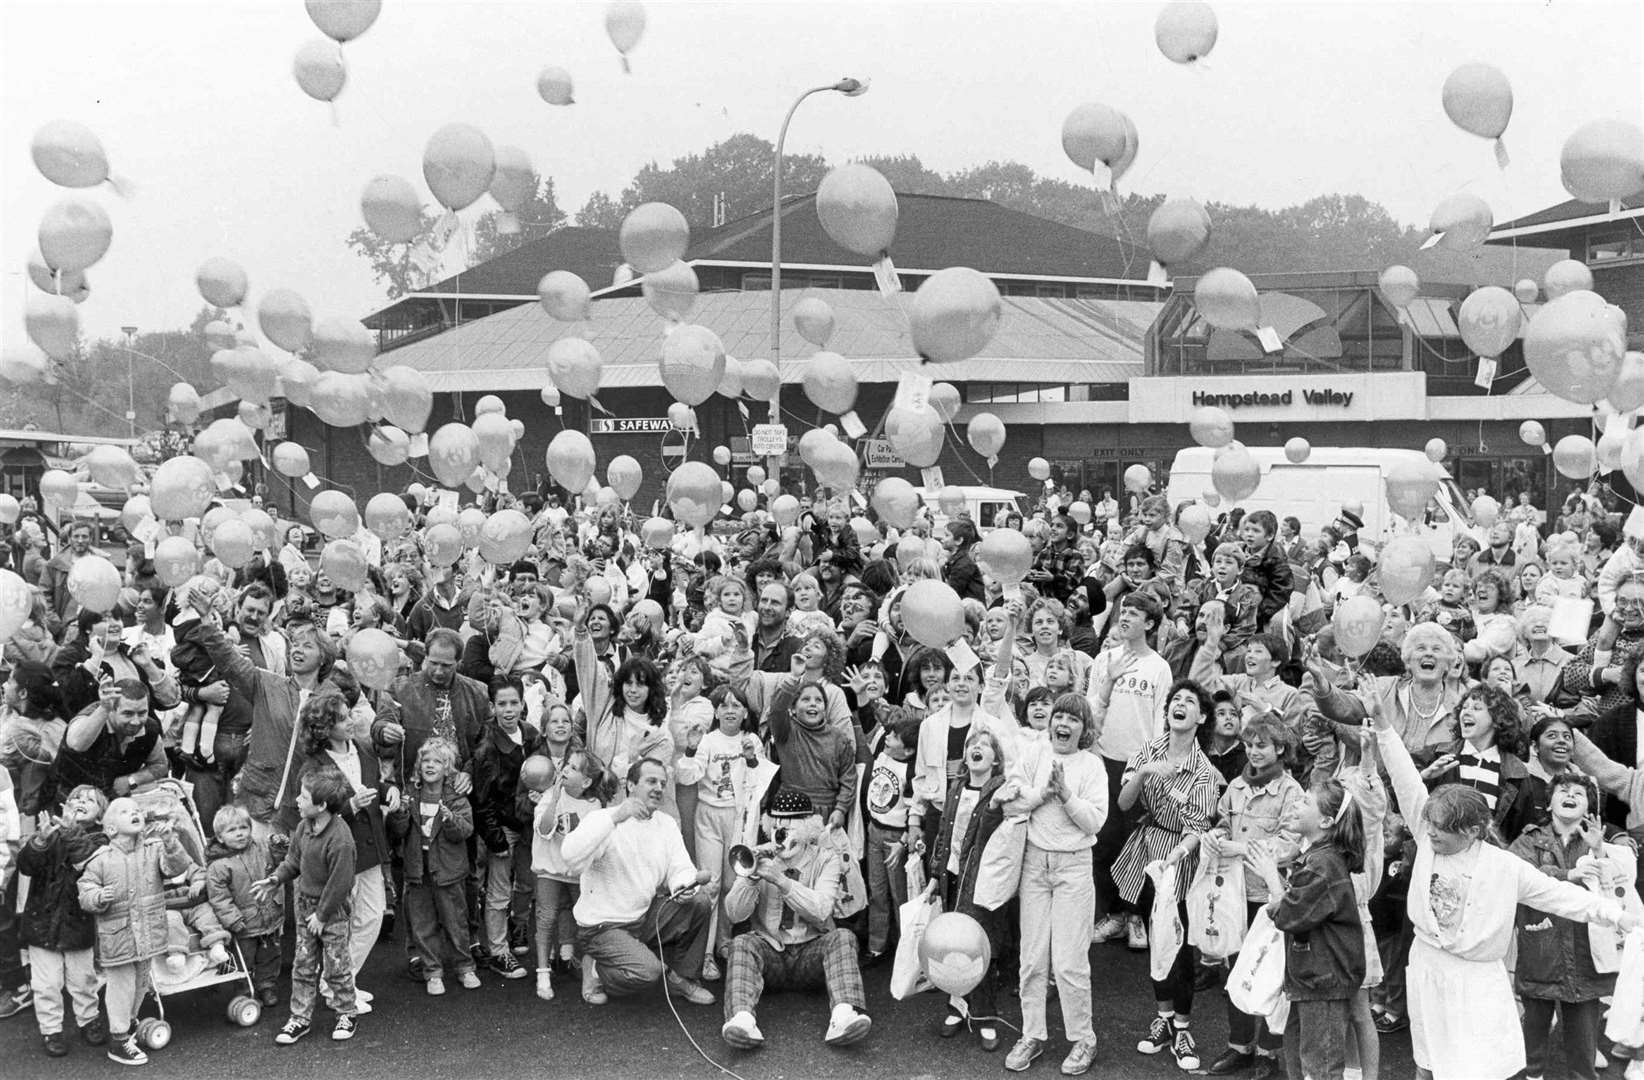 The releasing of balloons for the 10th anniversary of Hempstead Valley Shopping centre in Gillingham in 1988. Do you recognise anyone in the photo?